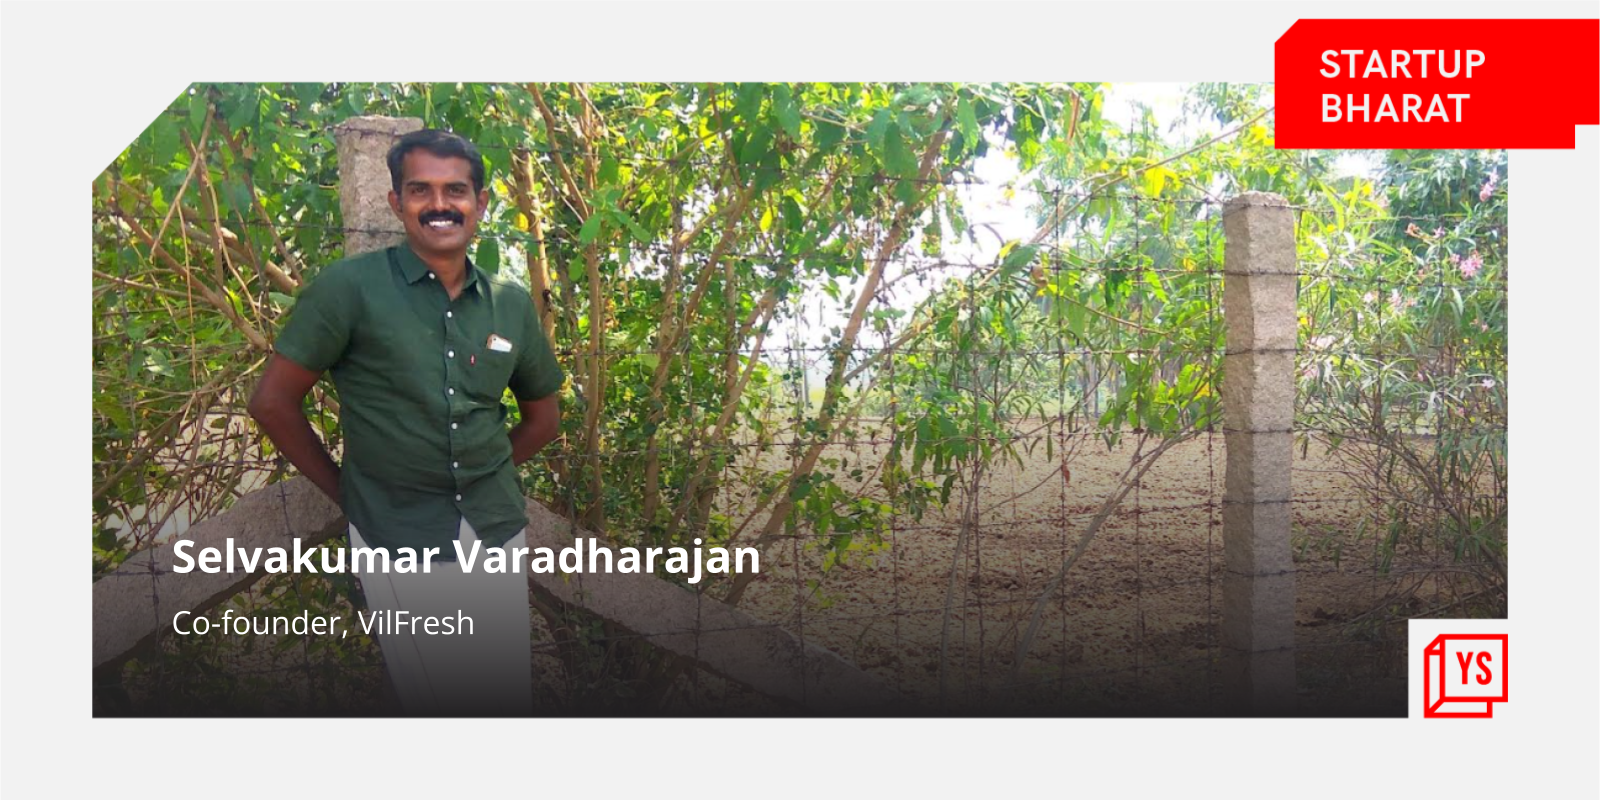 [Startup Bharat] Coimbatore-based VilFresh aims to generate Rs 7 Cr revenue this year